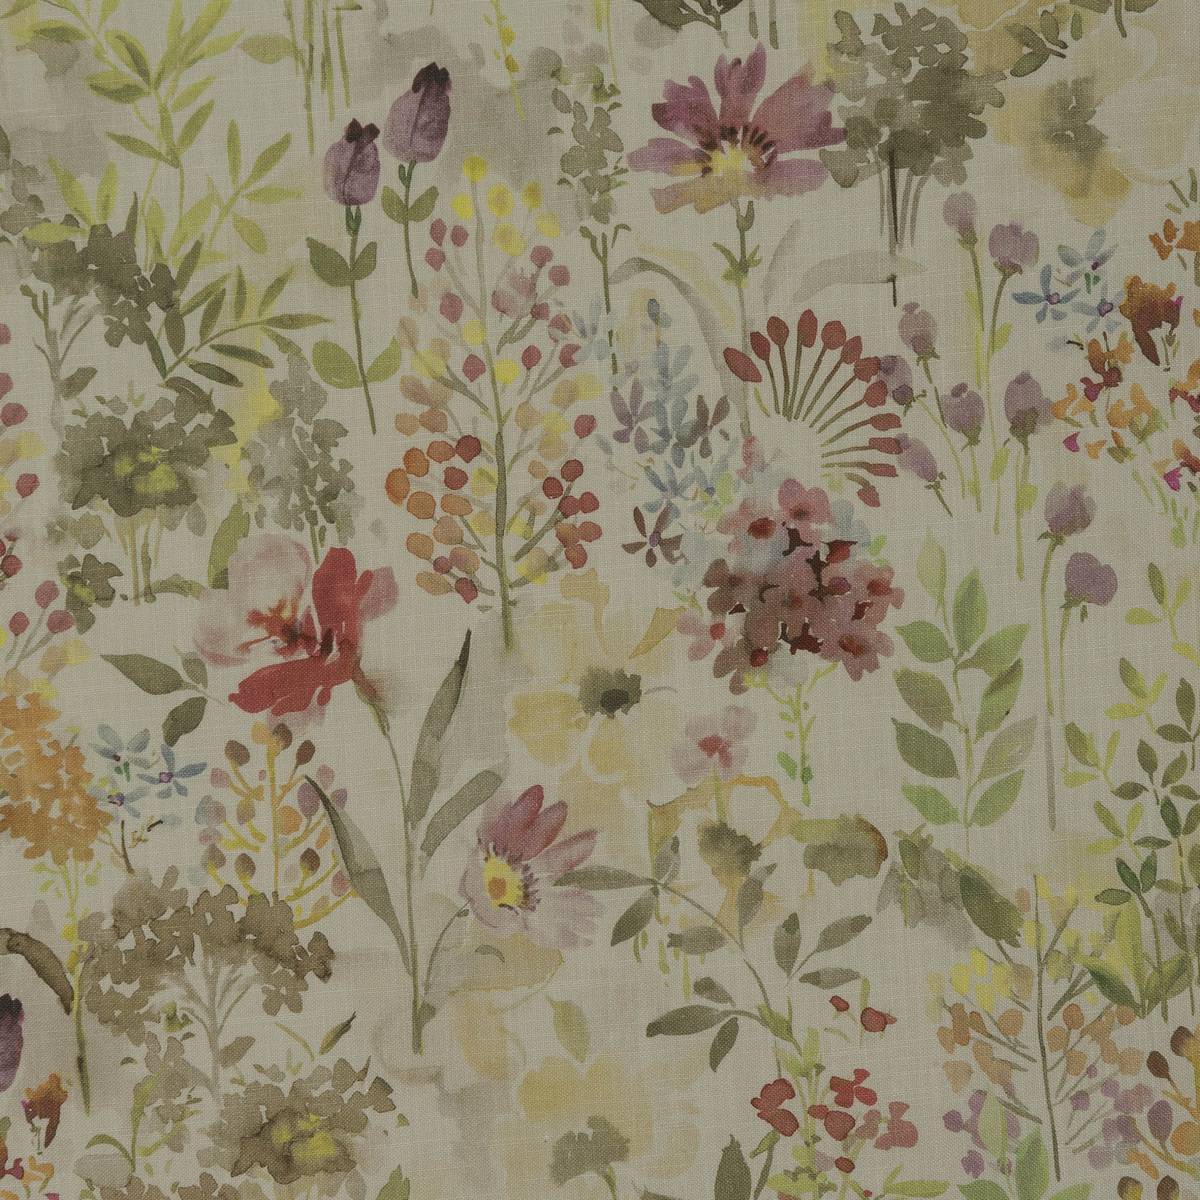 Aylesbury Autumn Fabric by Porter & Stone - Reduced To Clear ...